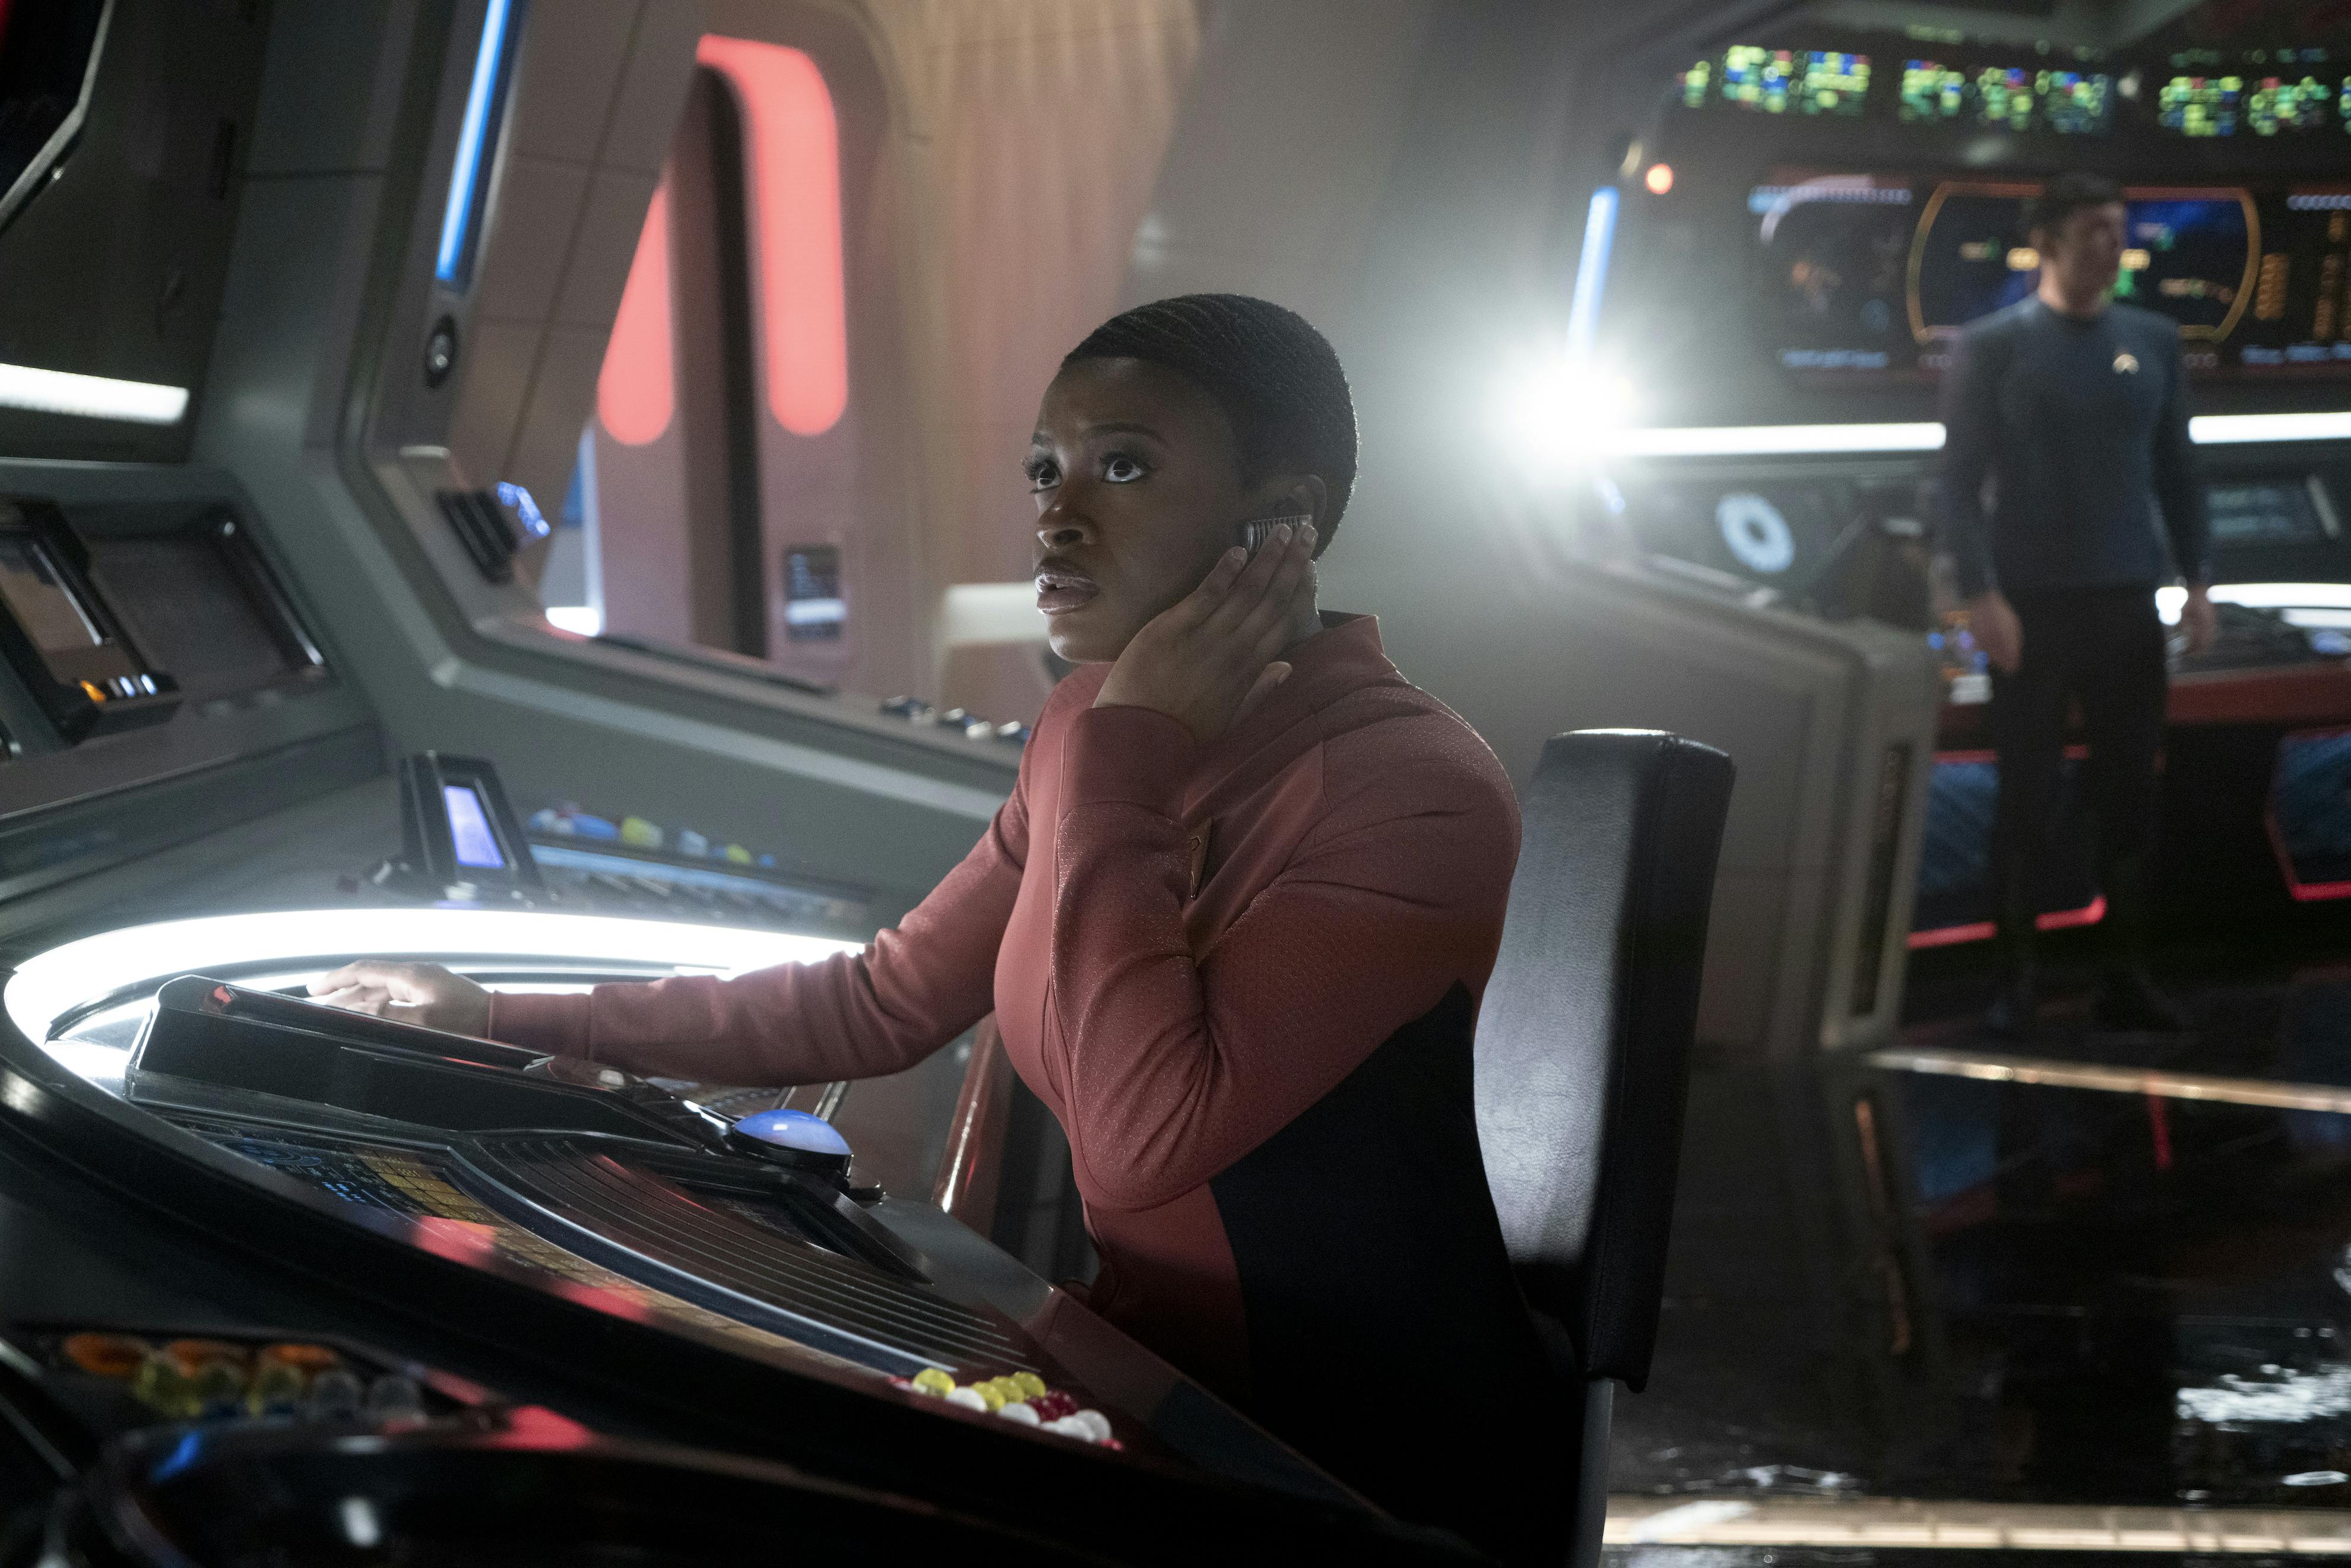 Uhura, sitting at her comms station, picks up on Batel's distress call from the surface of Parnassus Beta as Spock stands up alarmed at his station behind her in 'Hegemony'